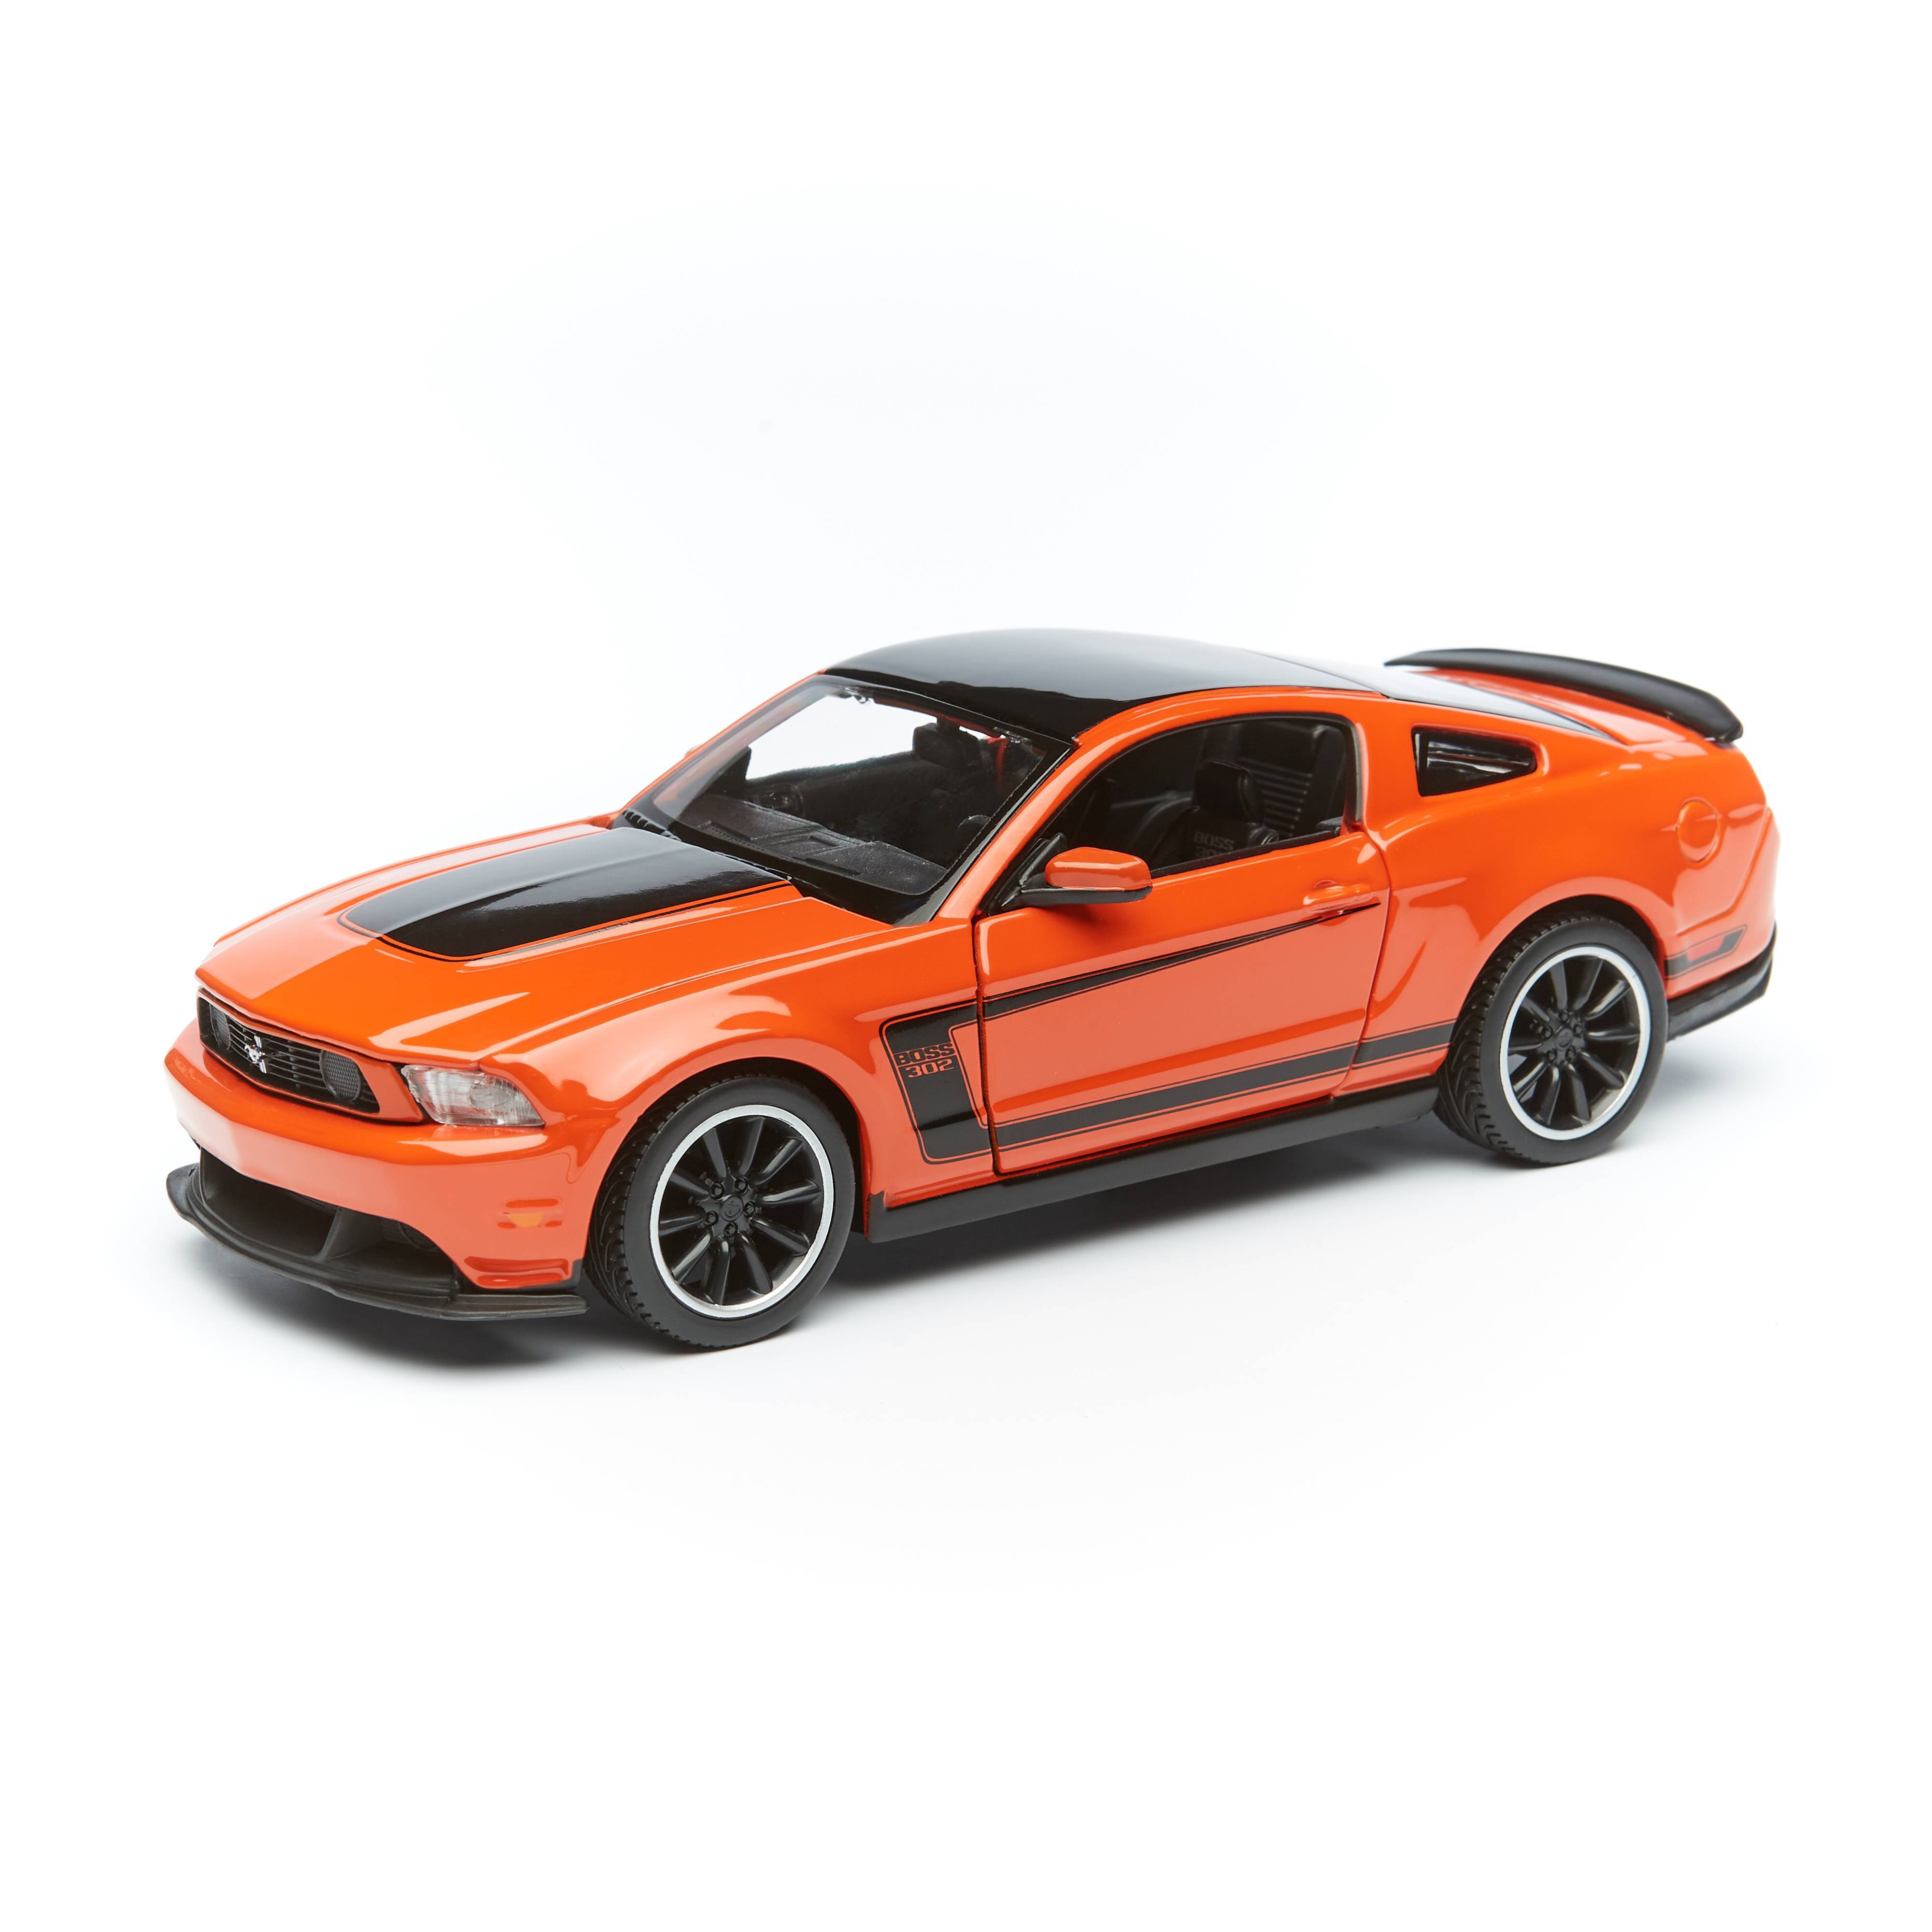 Игрушечная машинка Maisto Ford Mustang Boss 302 1:24, оранжевая 31519/31269/1 maisto 1 24 2015 ford mustang static die cast vehicles collectible model car toys